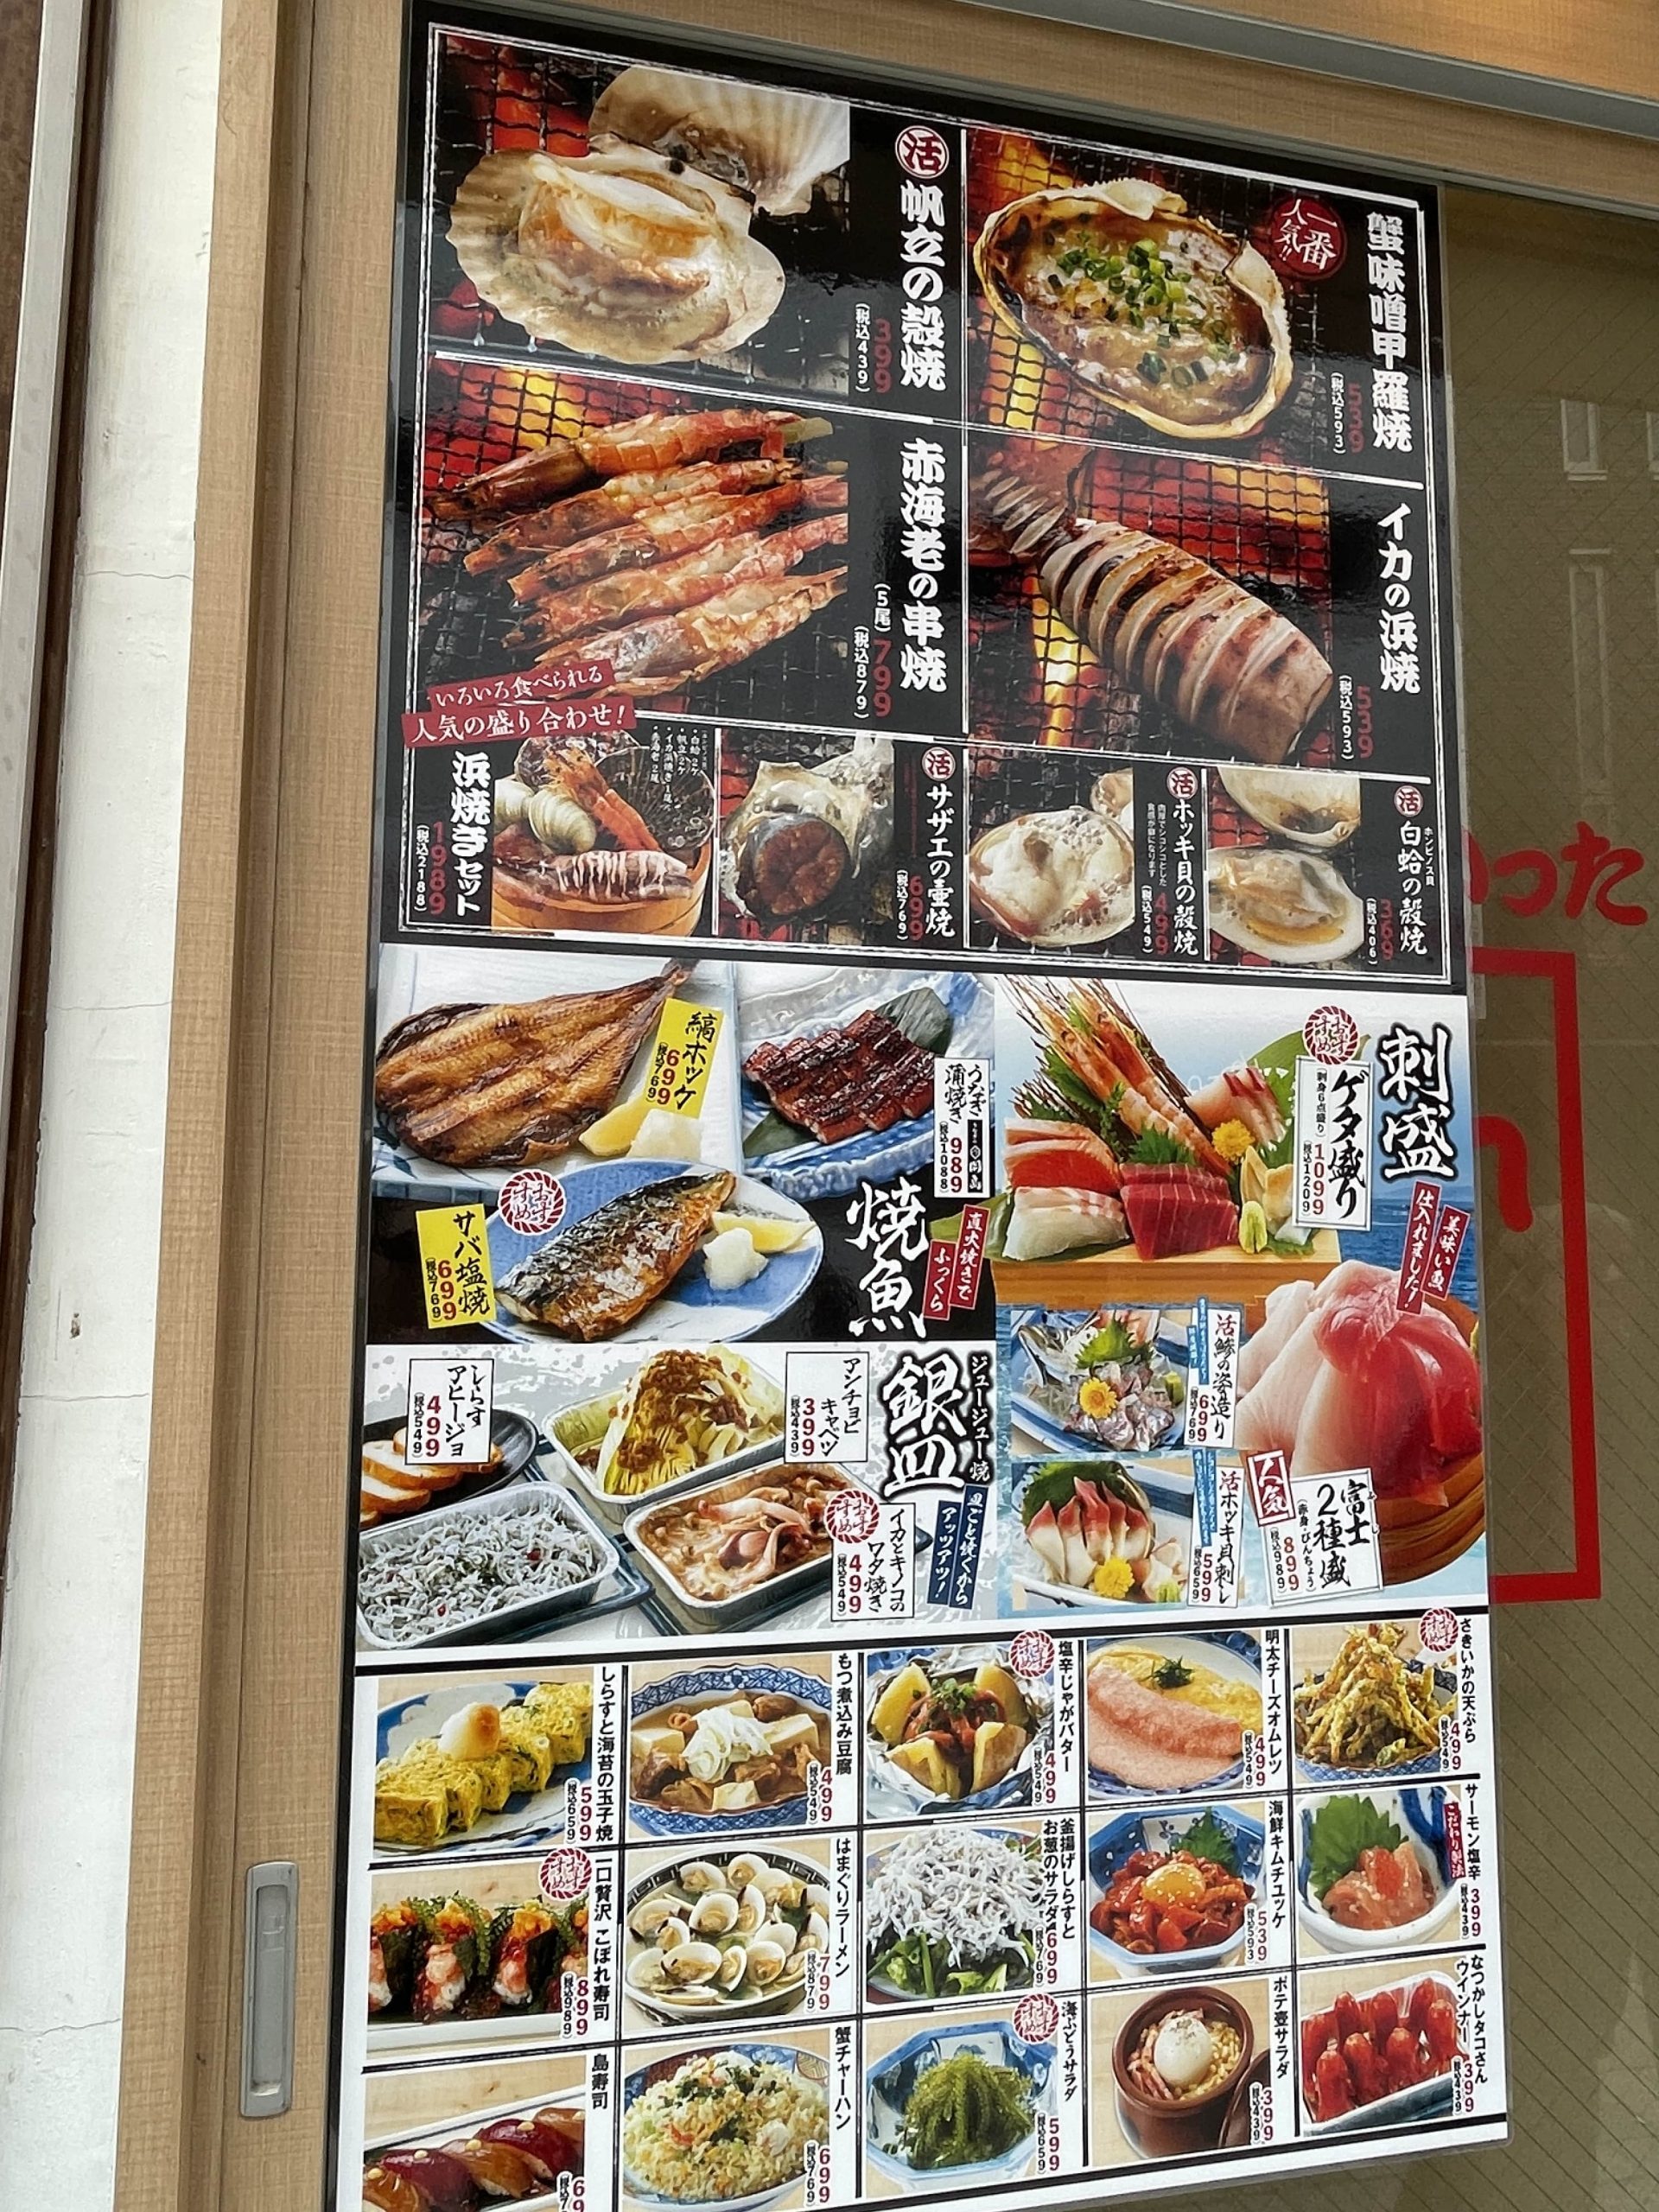 japan restaurant menu what to eat if you only like western food google translate detailed 10 day japan itinerary